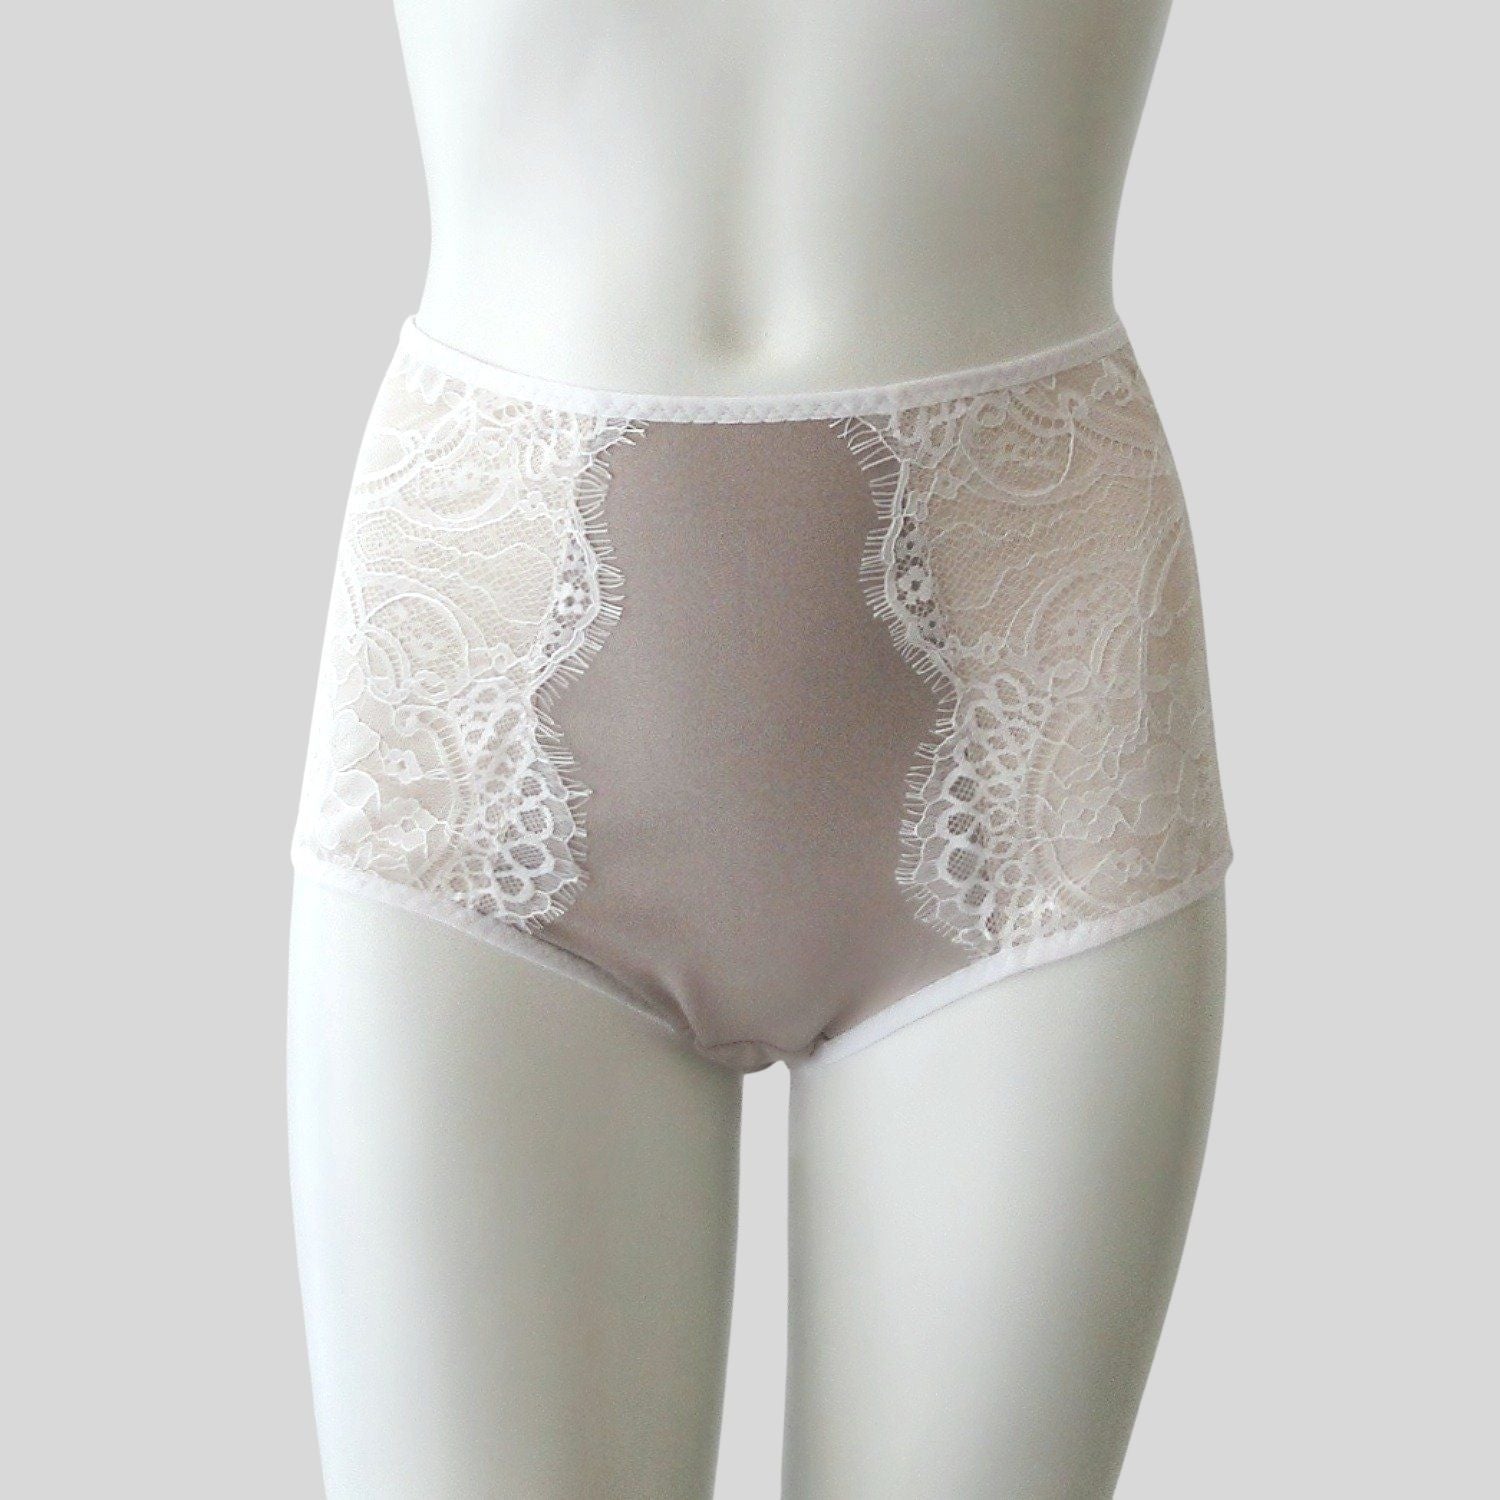 Shop High waisted lace panties | lace panties, organic cotton lingerie | high rise organic underwear | Organic lingerie for women